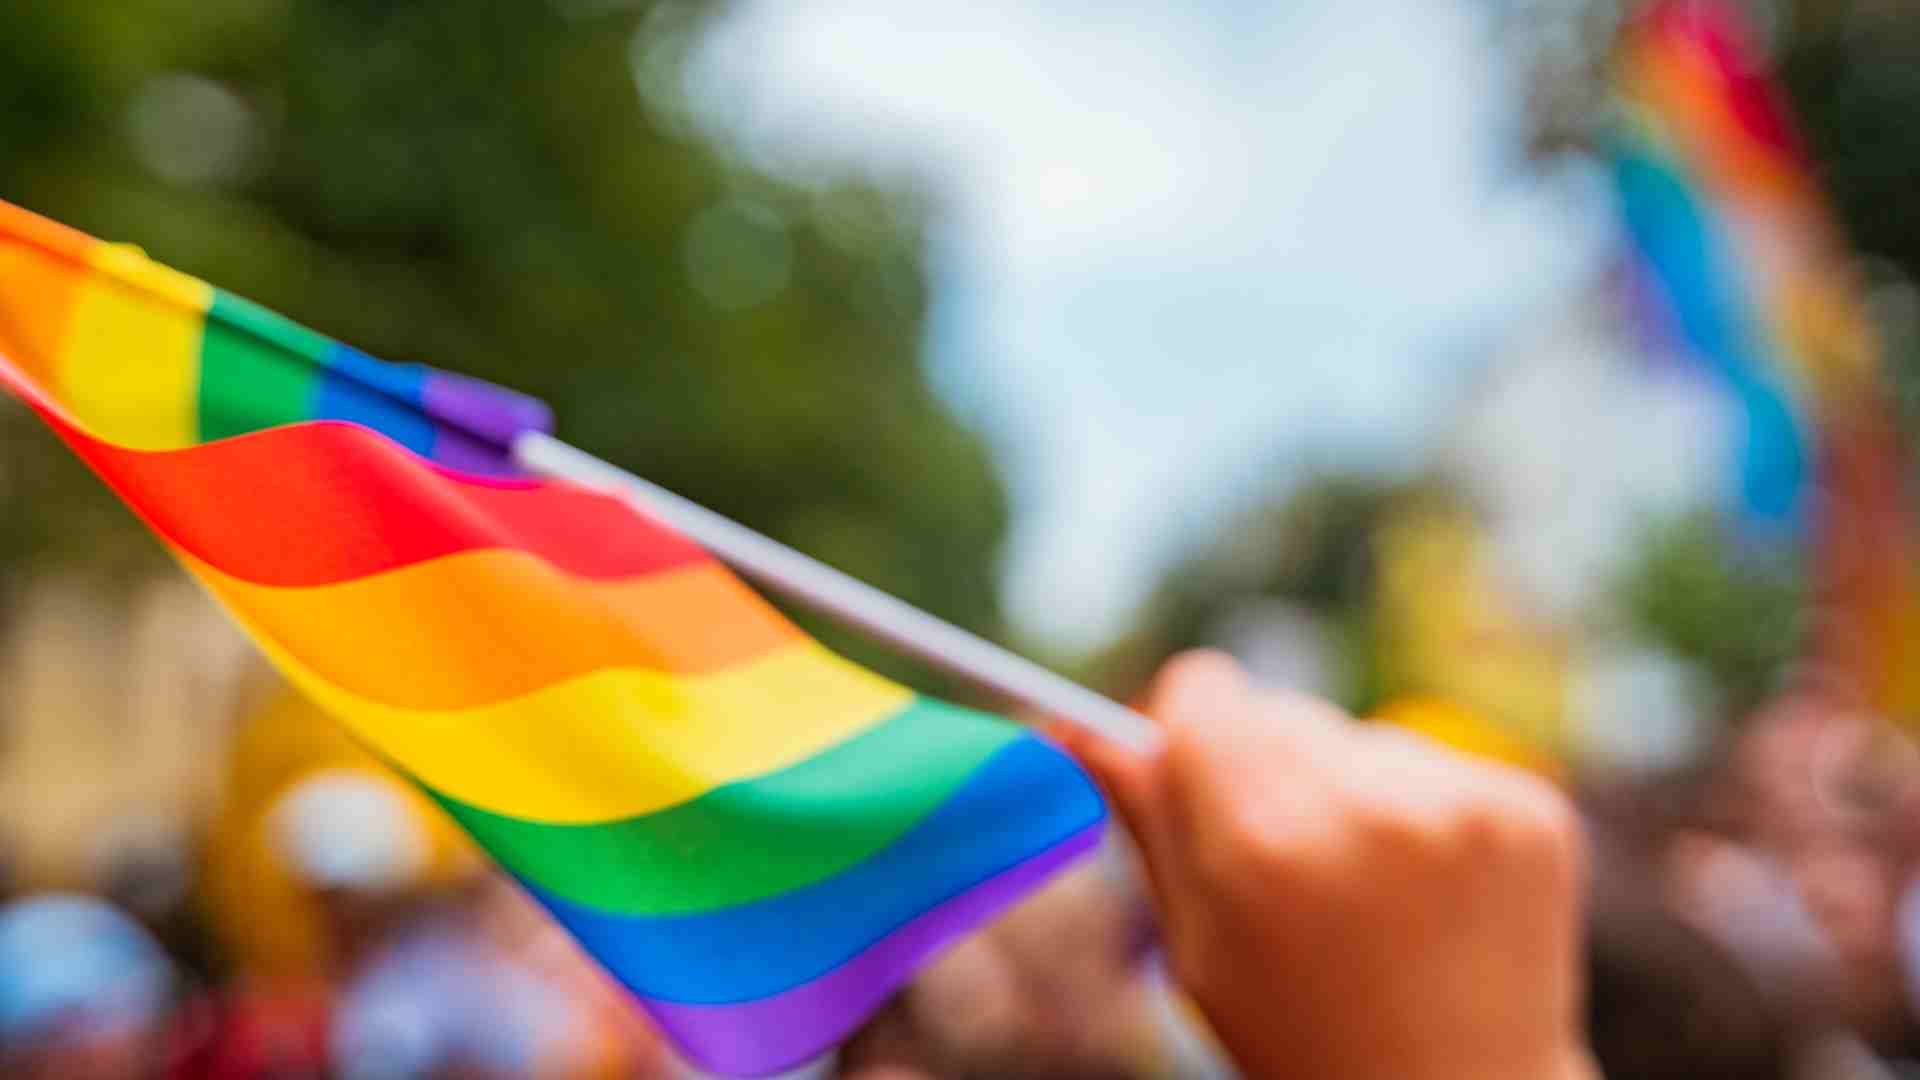 An image with a blurred out background of an event happening outside with lots of people and a hand in the foreground waving a rainbow flag